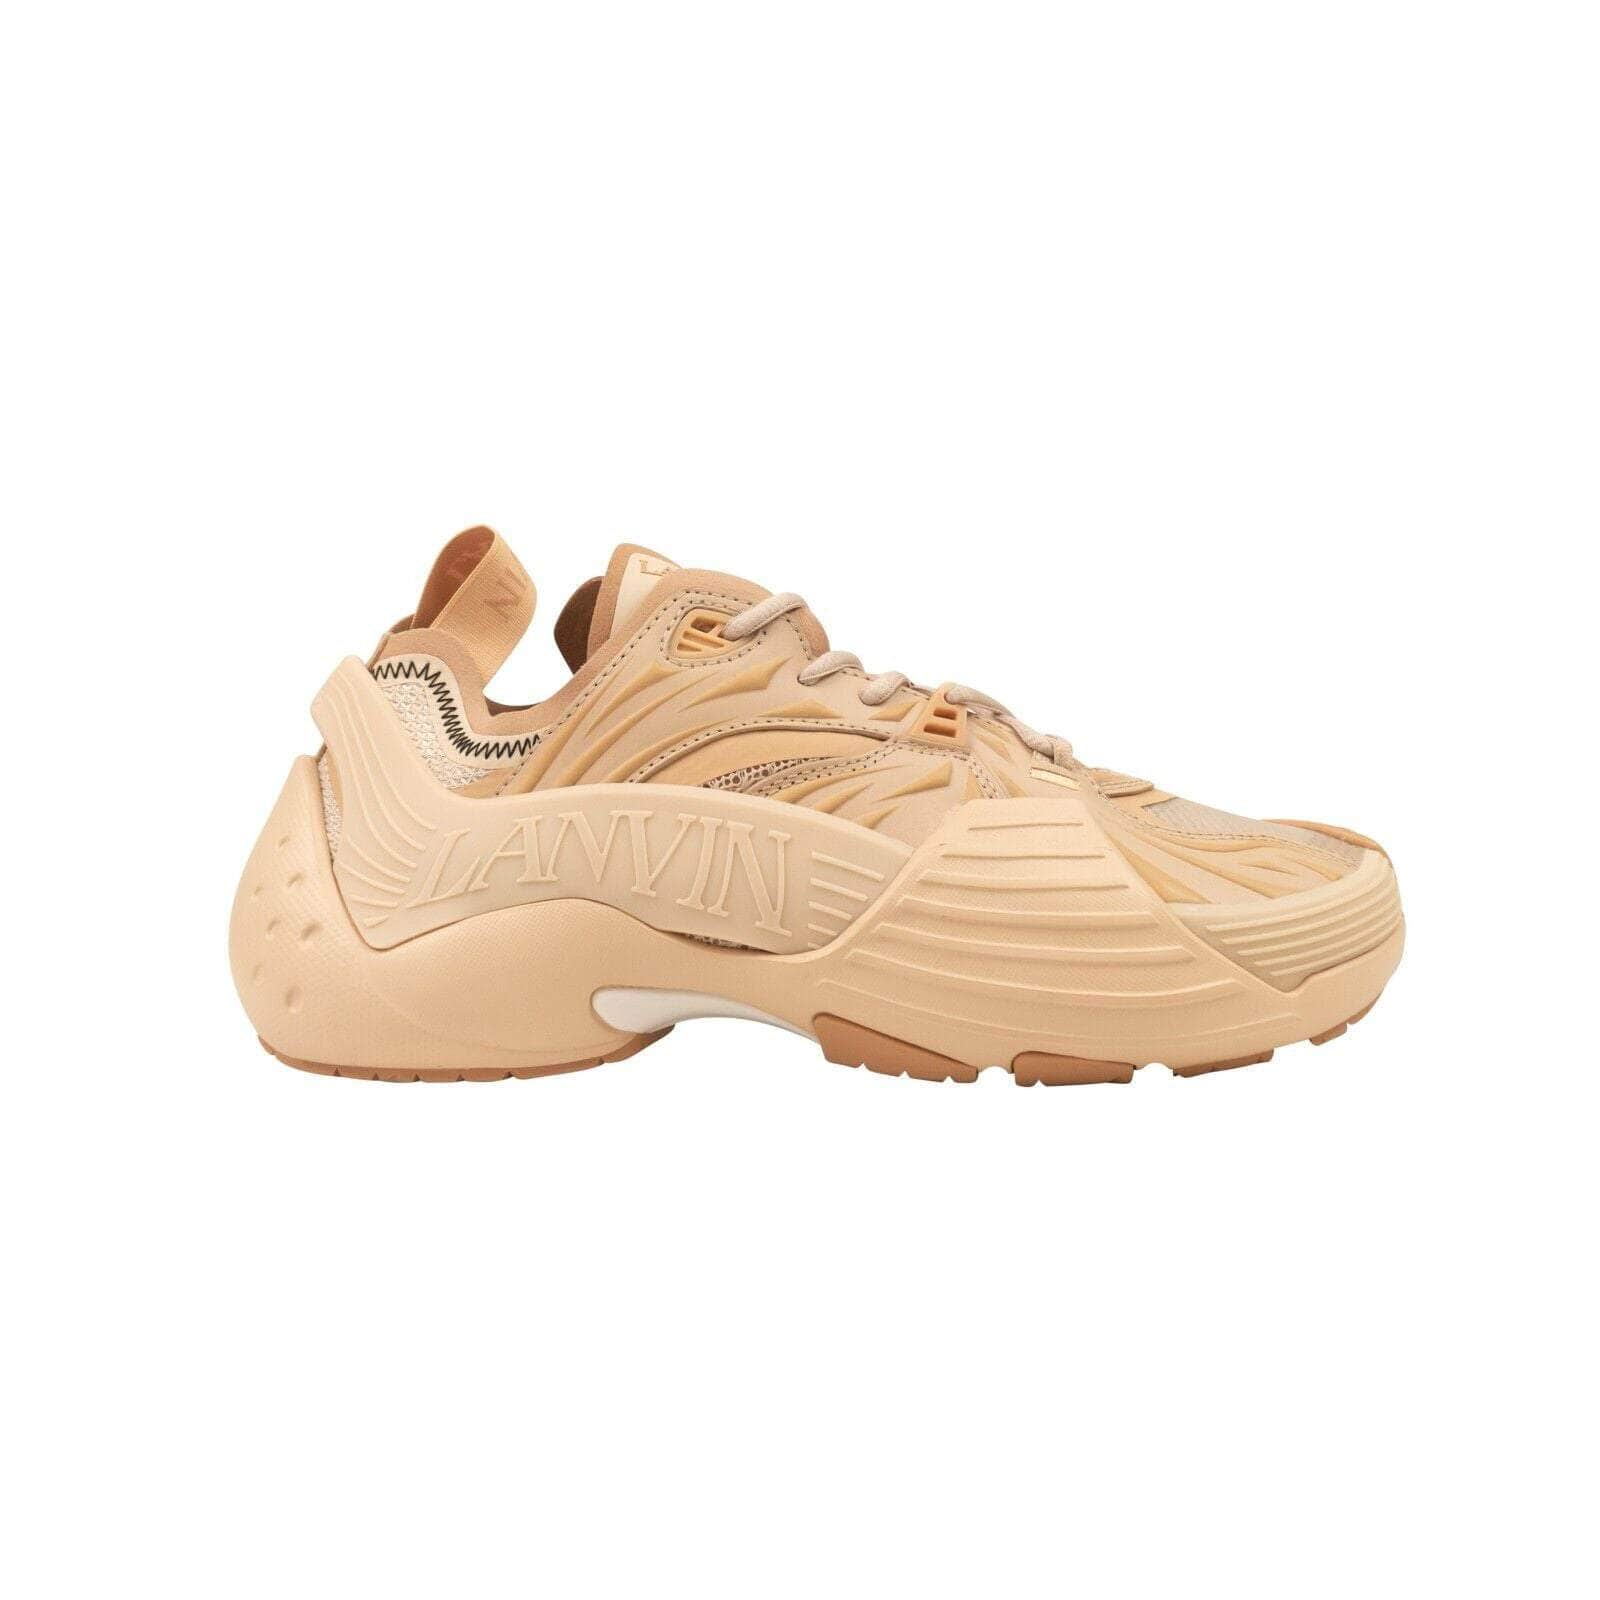 Lanvin 500-750, channelenable-all, chicmi, couponcollection, gender-mens, main-shoes, mens-shoes, size-41 Nude Flash X Low Top Athletic Sneakers